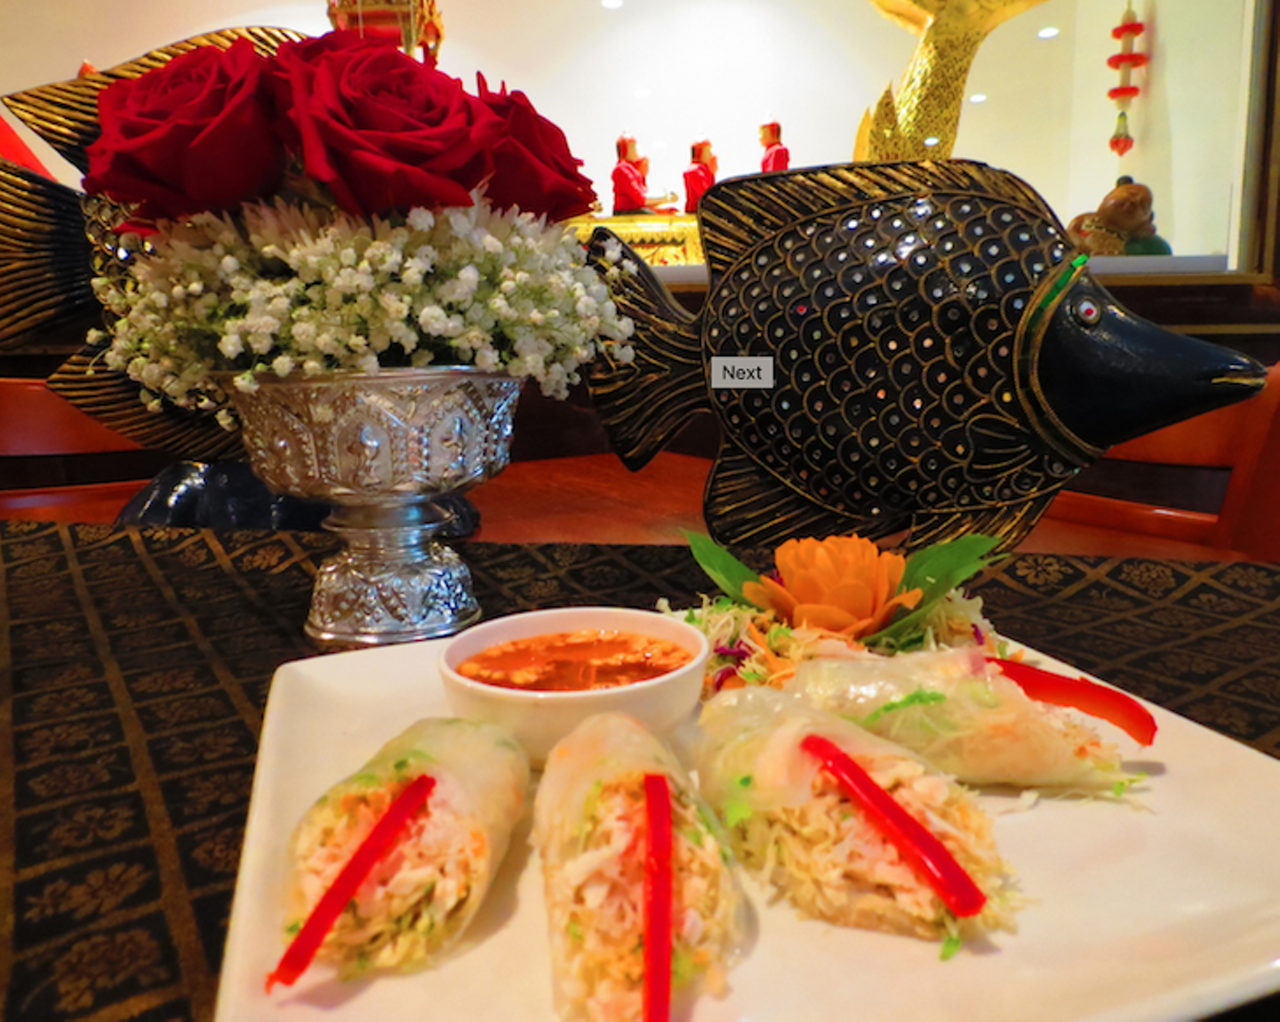 Thailand Tampa Restaurant
5252 S Dale Mabry Hwy., Tampa
Beginning in 1979, the Thailand Tampa Restaurant was the first Thai place to eat in South Tampa. Thai decor decorates the walls and tables, with a golden dragon boat and wooden statues. Traditional Thai dishes like the Thai-style beef salad, pad thai and curry duck bring regulars back for more.
Photo via Thailand Tampa Restaurant/Website